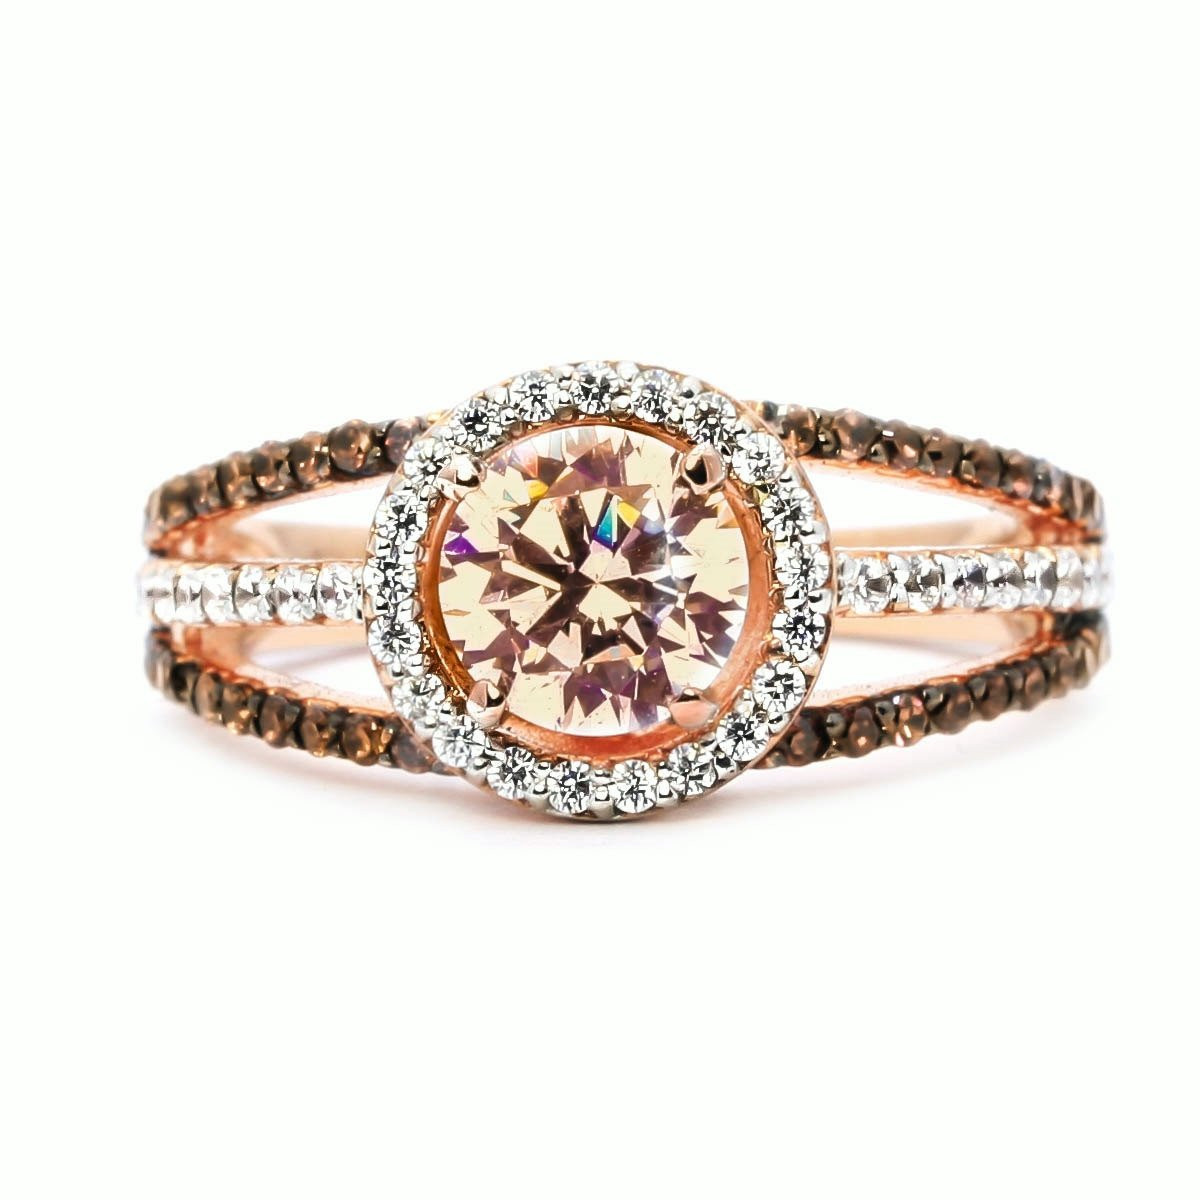 Rose Gold Engagement Rings With Chocolate Diamonds
 Floating Halo Rose Gold White & Brown Diamonds 6 5 mm